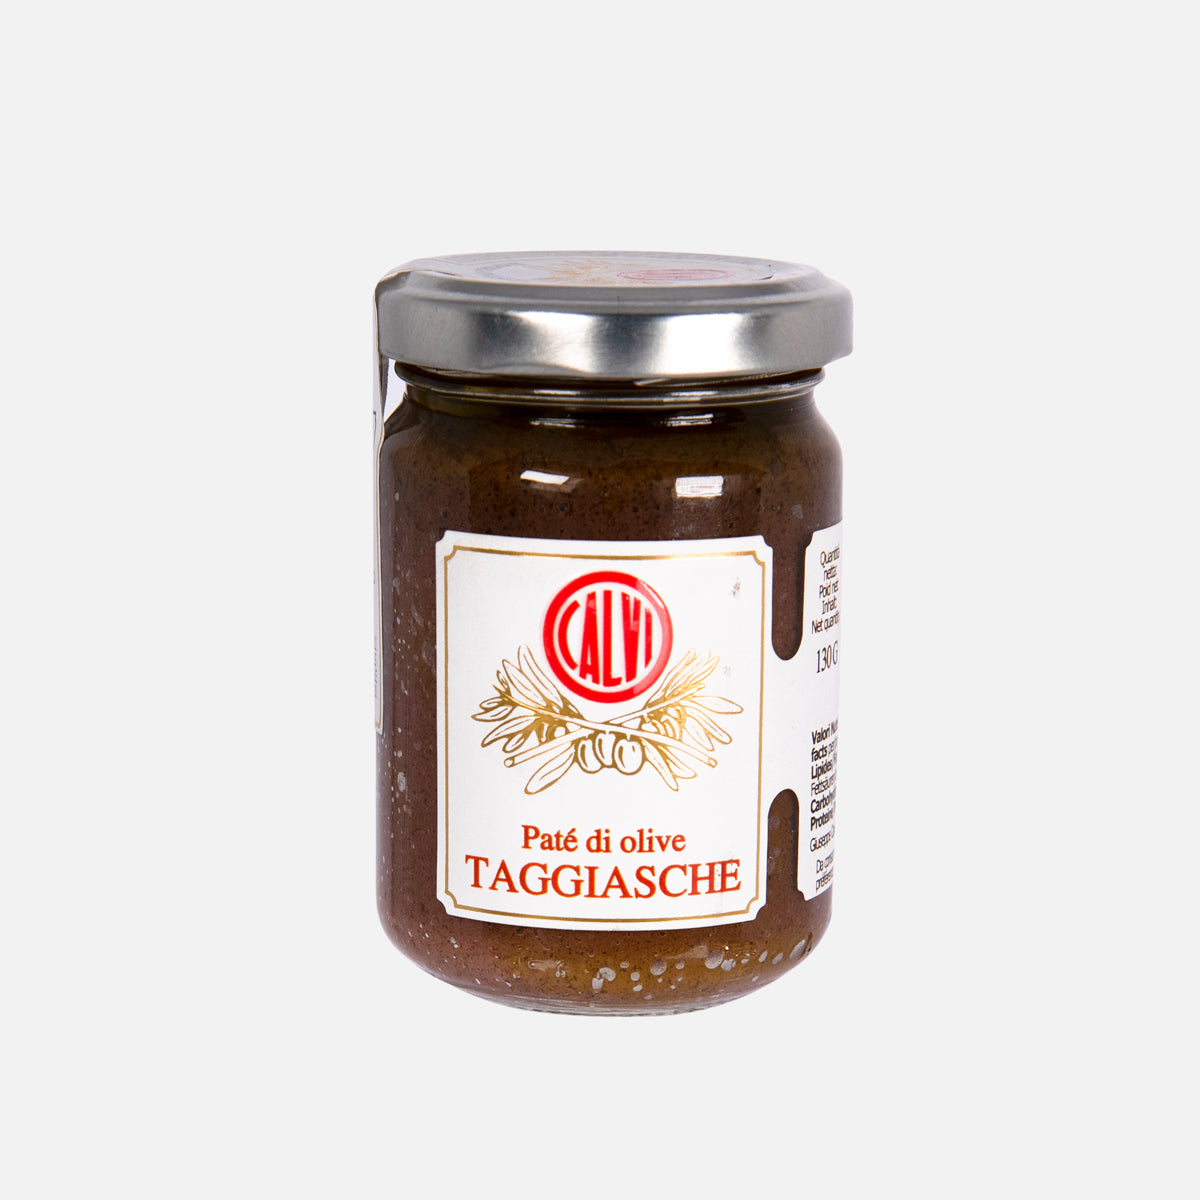 Taggiasca Olive Pate: Flavorful Olive Pate with Taggiasca Olives